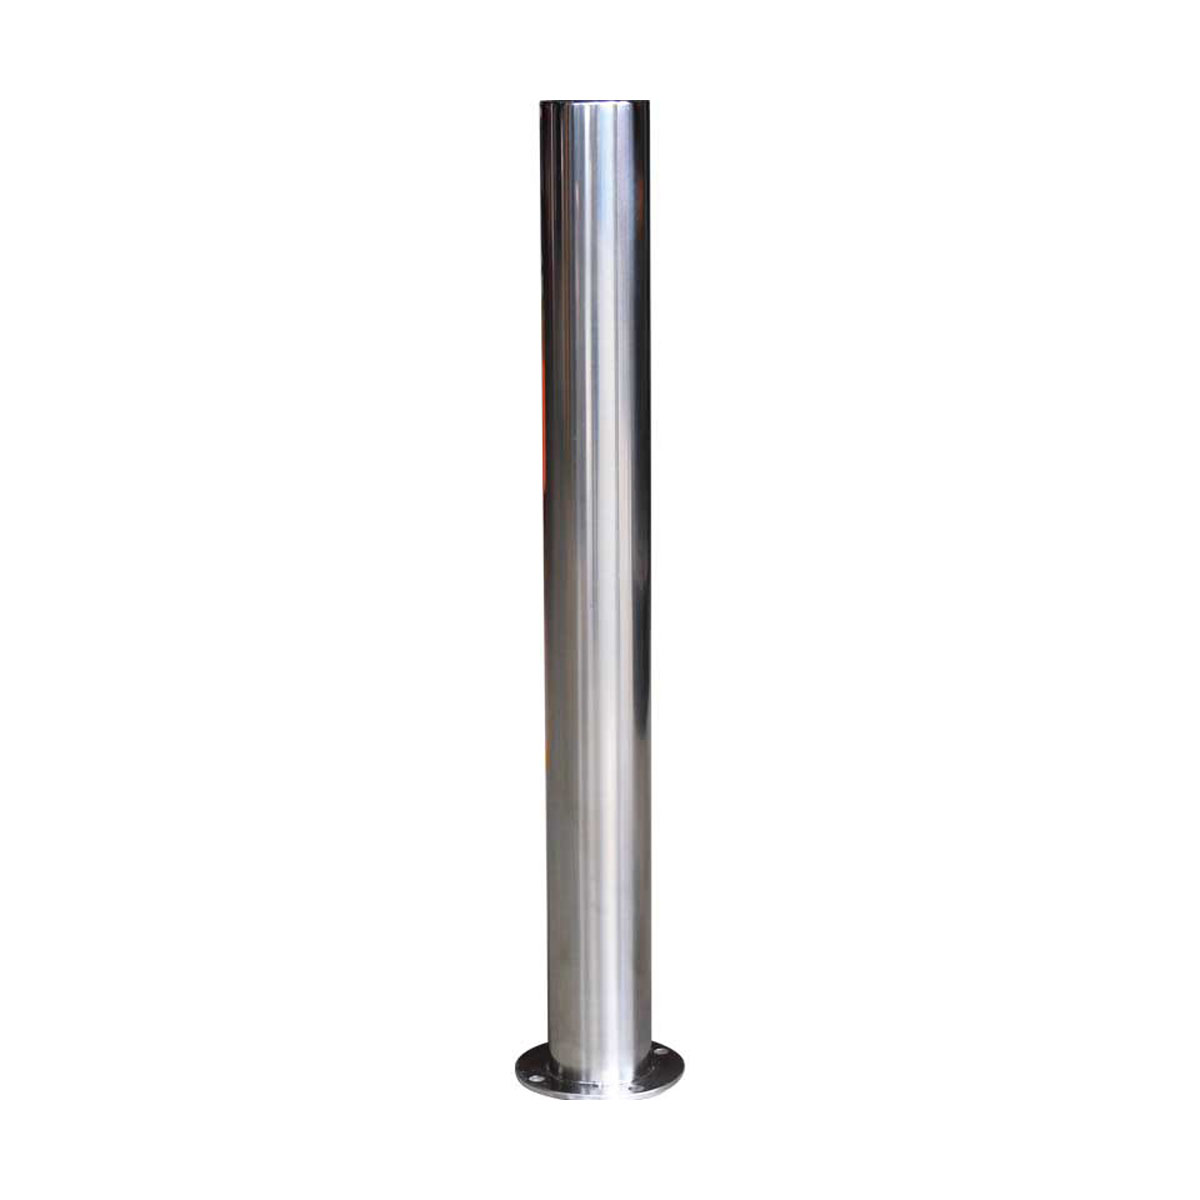 Buy Bolt-down Bollard (Stainless Steel) available at Astrolift NZ